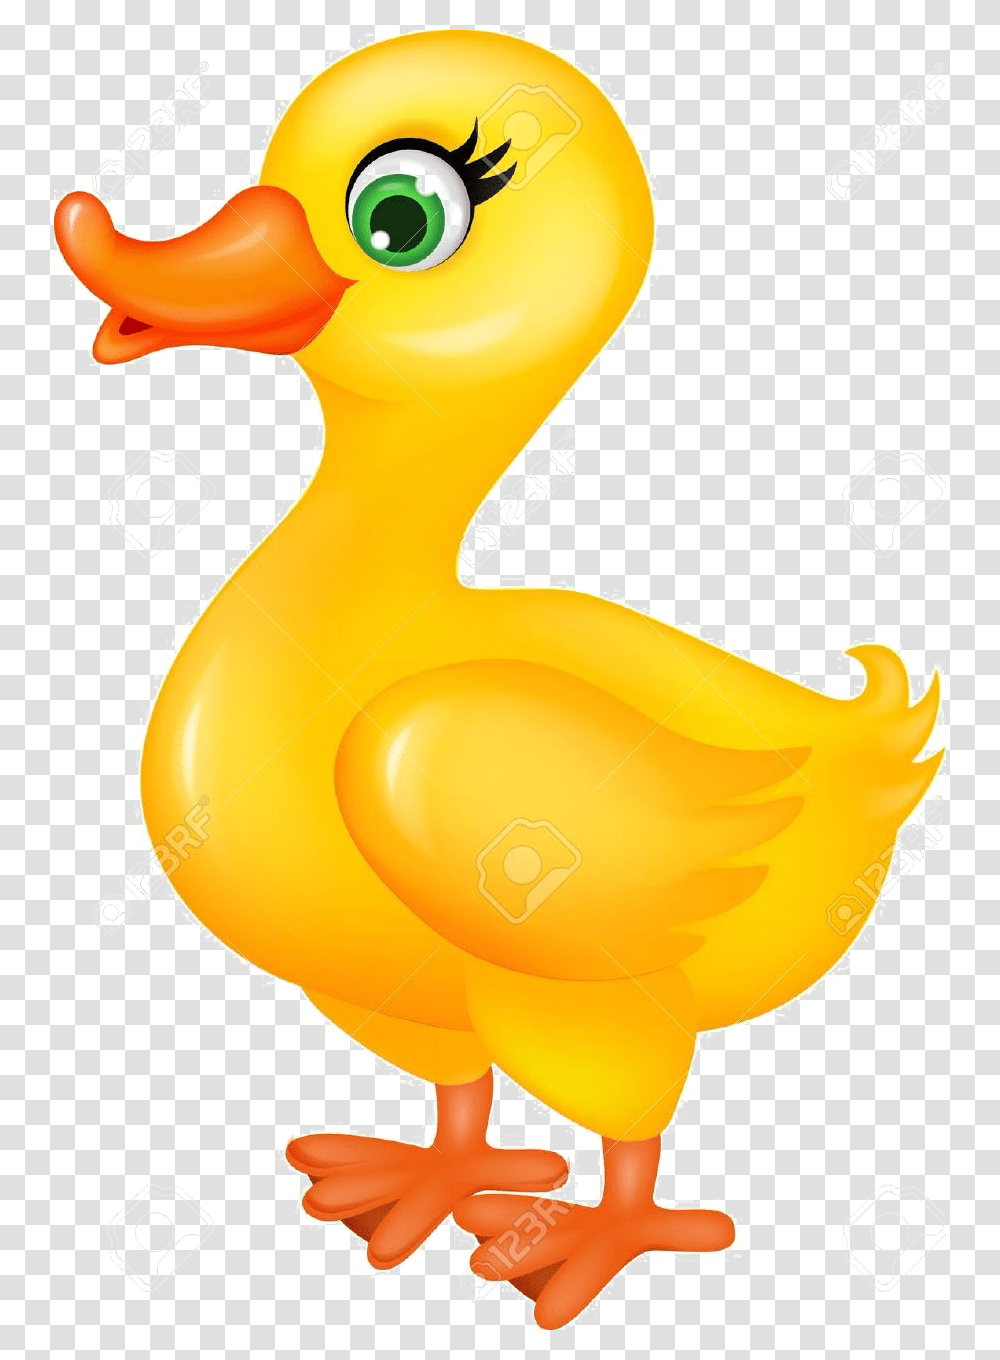 Yellow Duck Free Image Duck Cartoon Images, Bird, Animal, Toy, Balloon Transparent Png